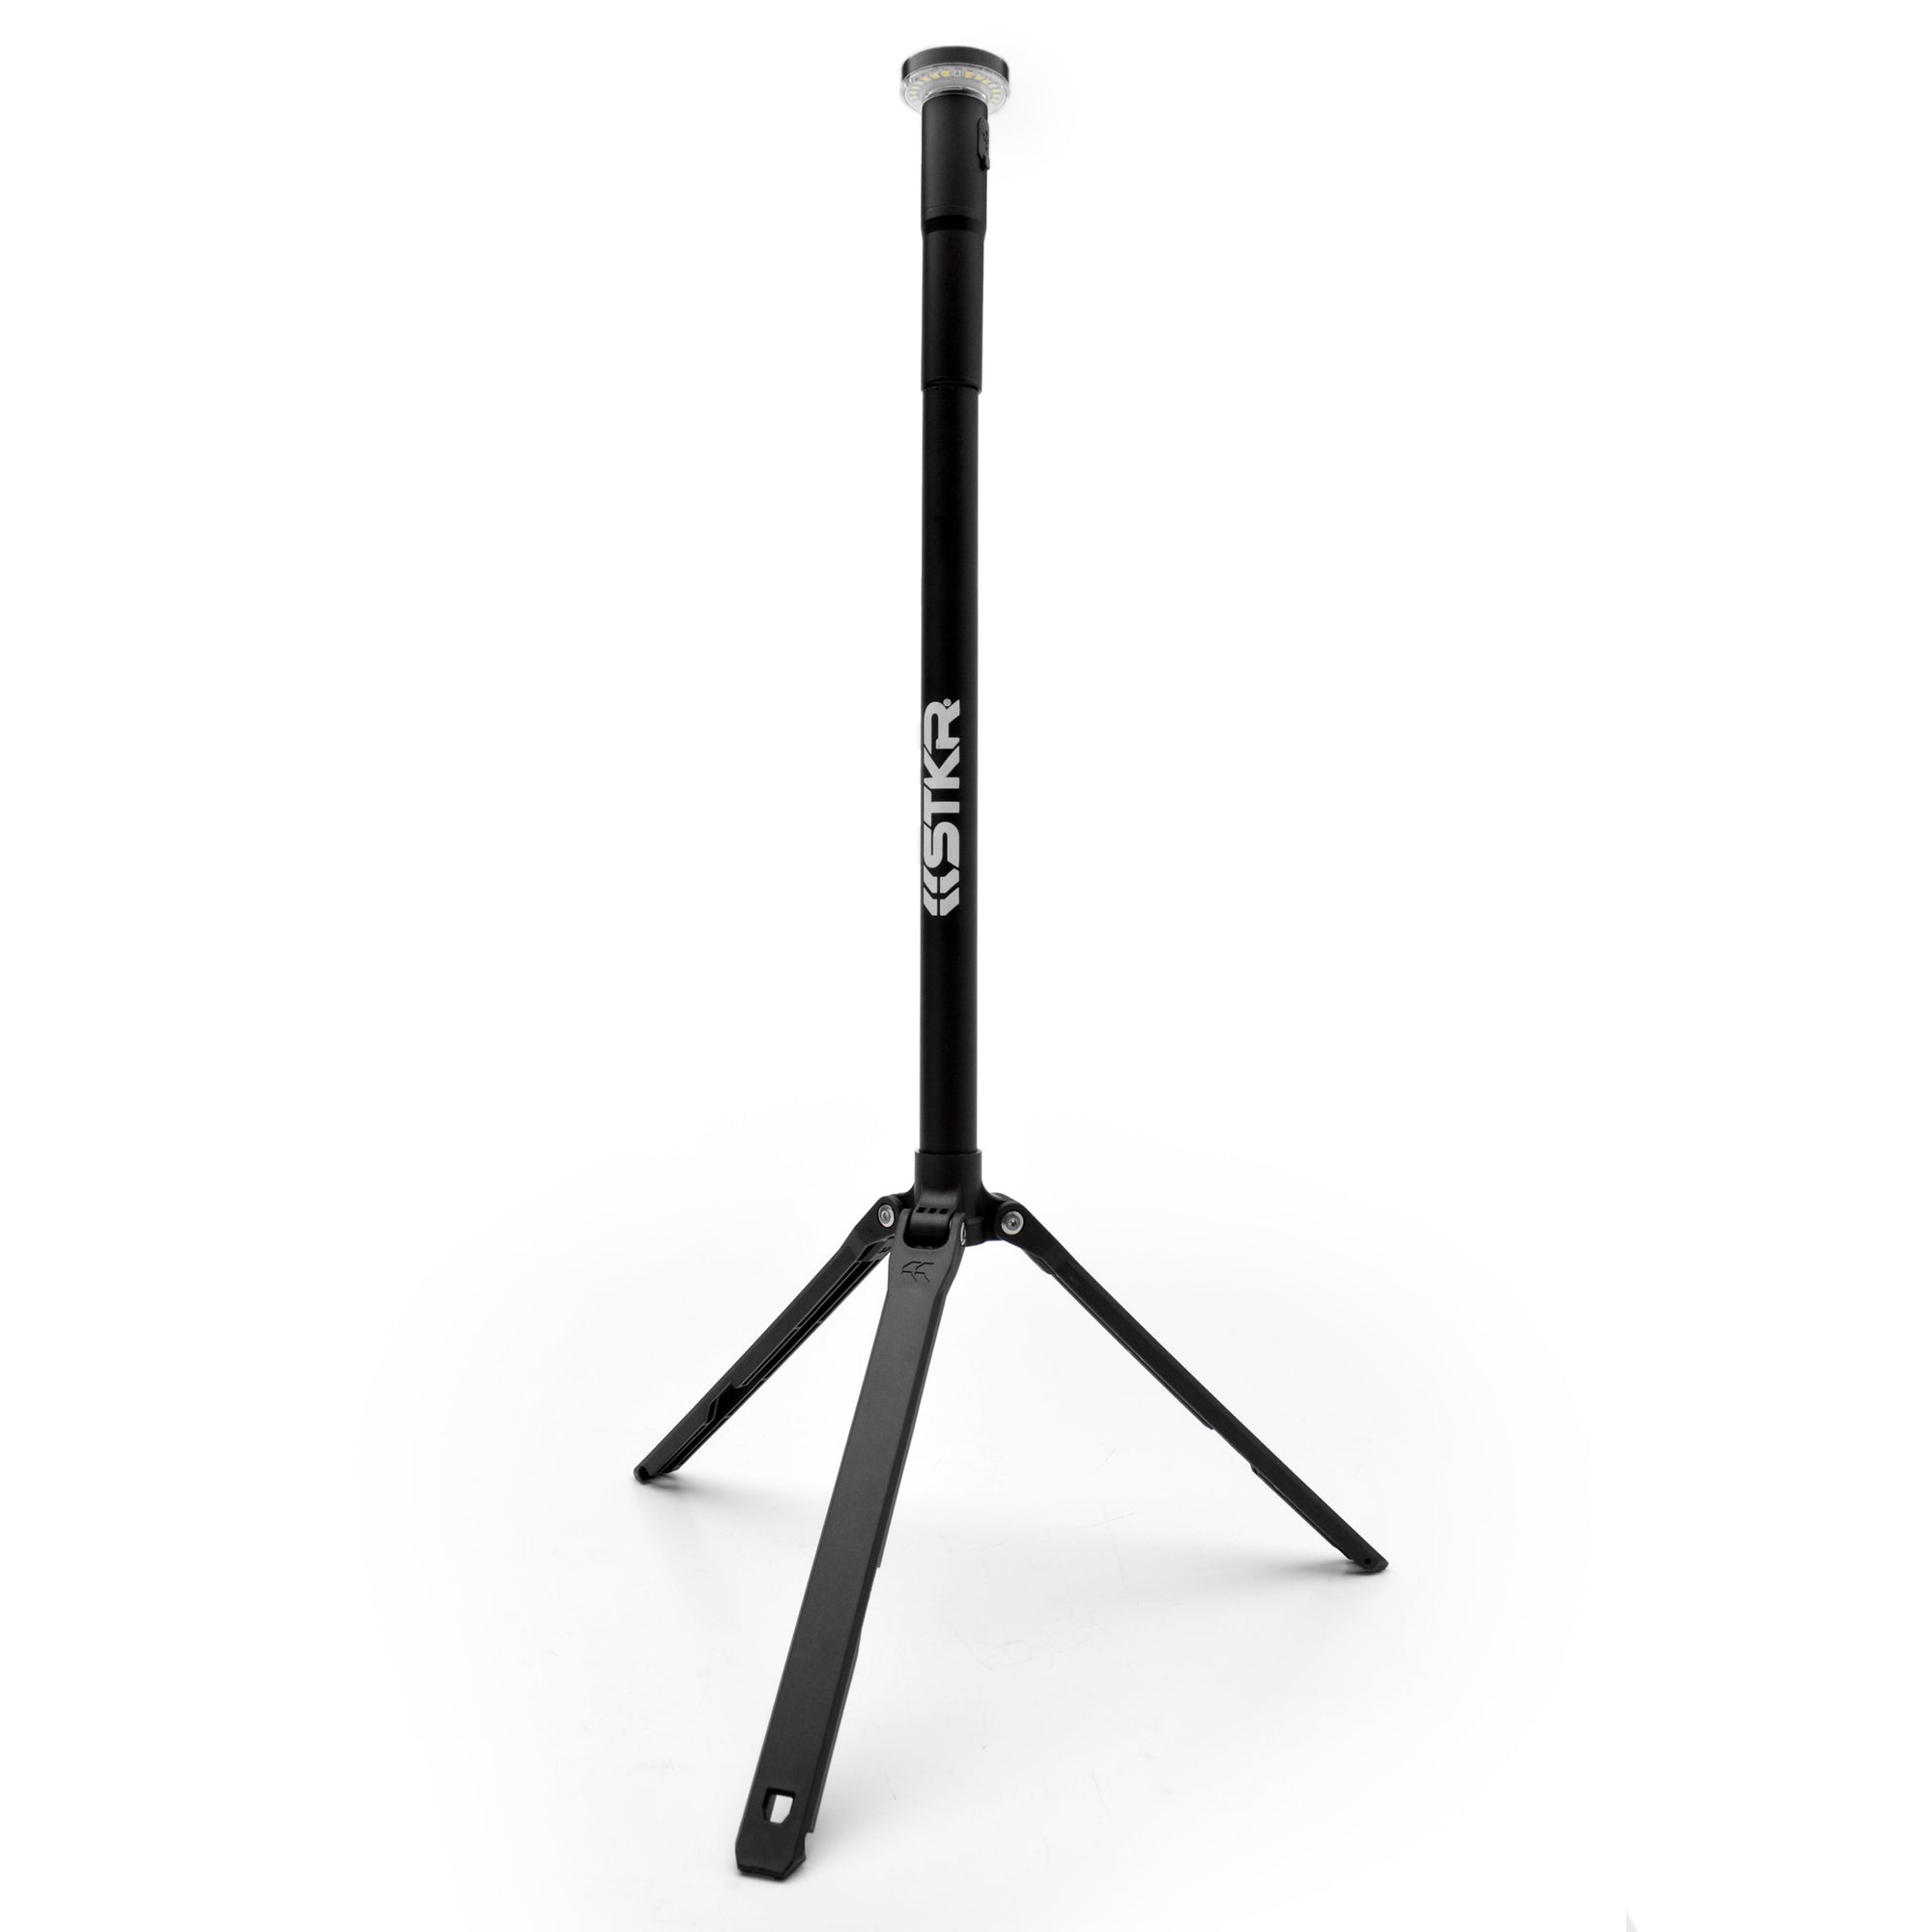 Fli Telescoping Mobile Area Light standing at its shortest height on a white studio background